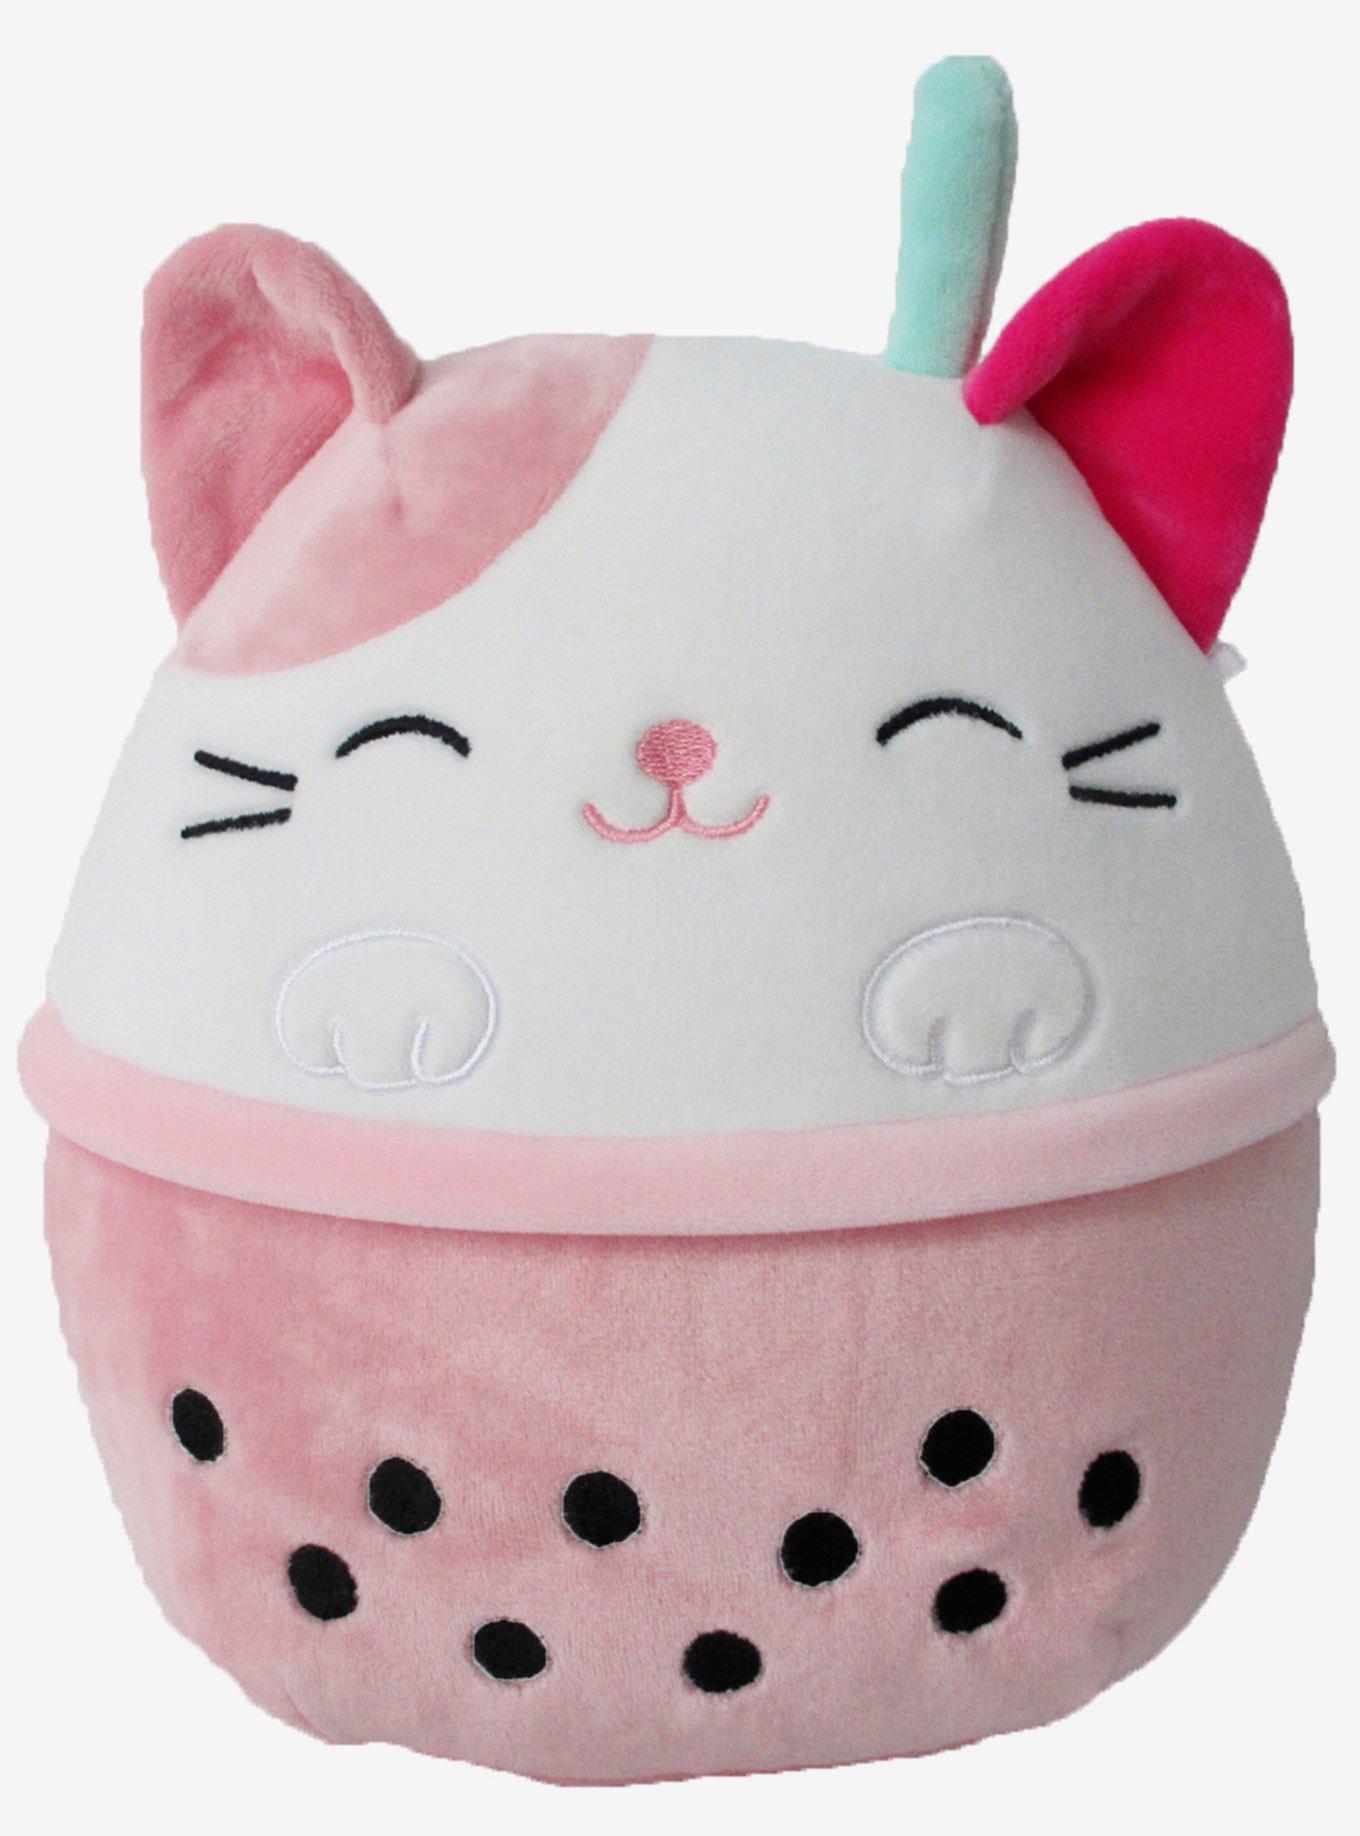 What squishmallow will you get? Come get a mystery straw topper, now i